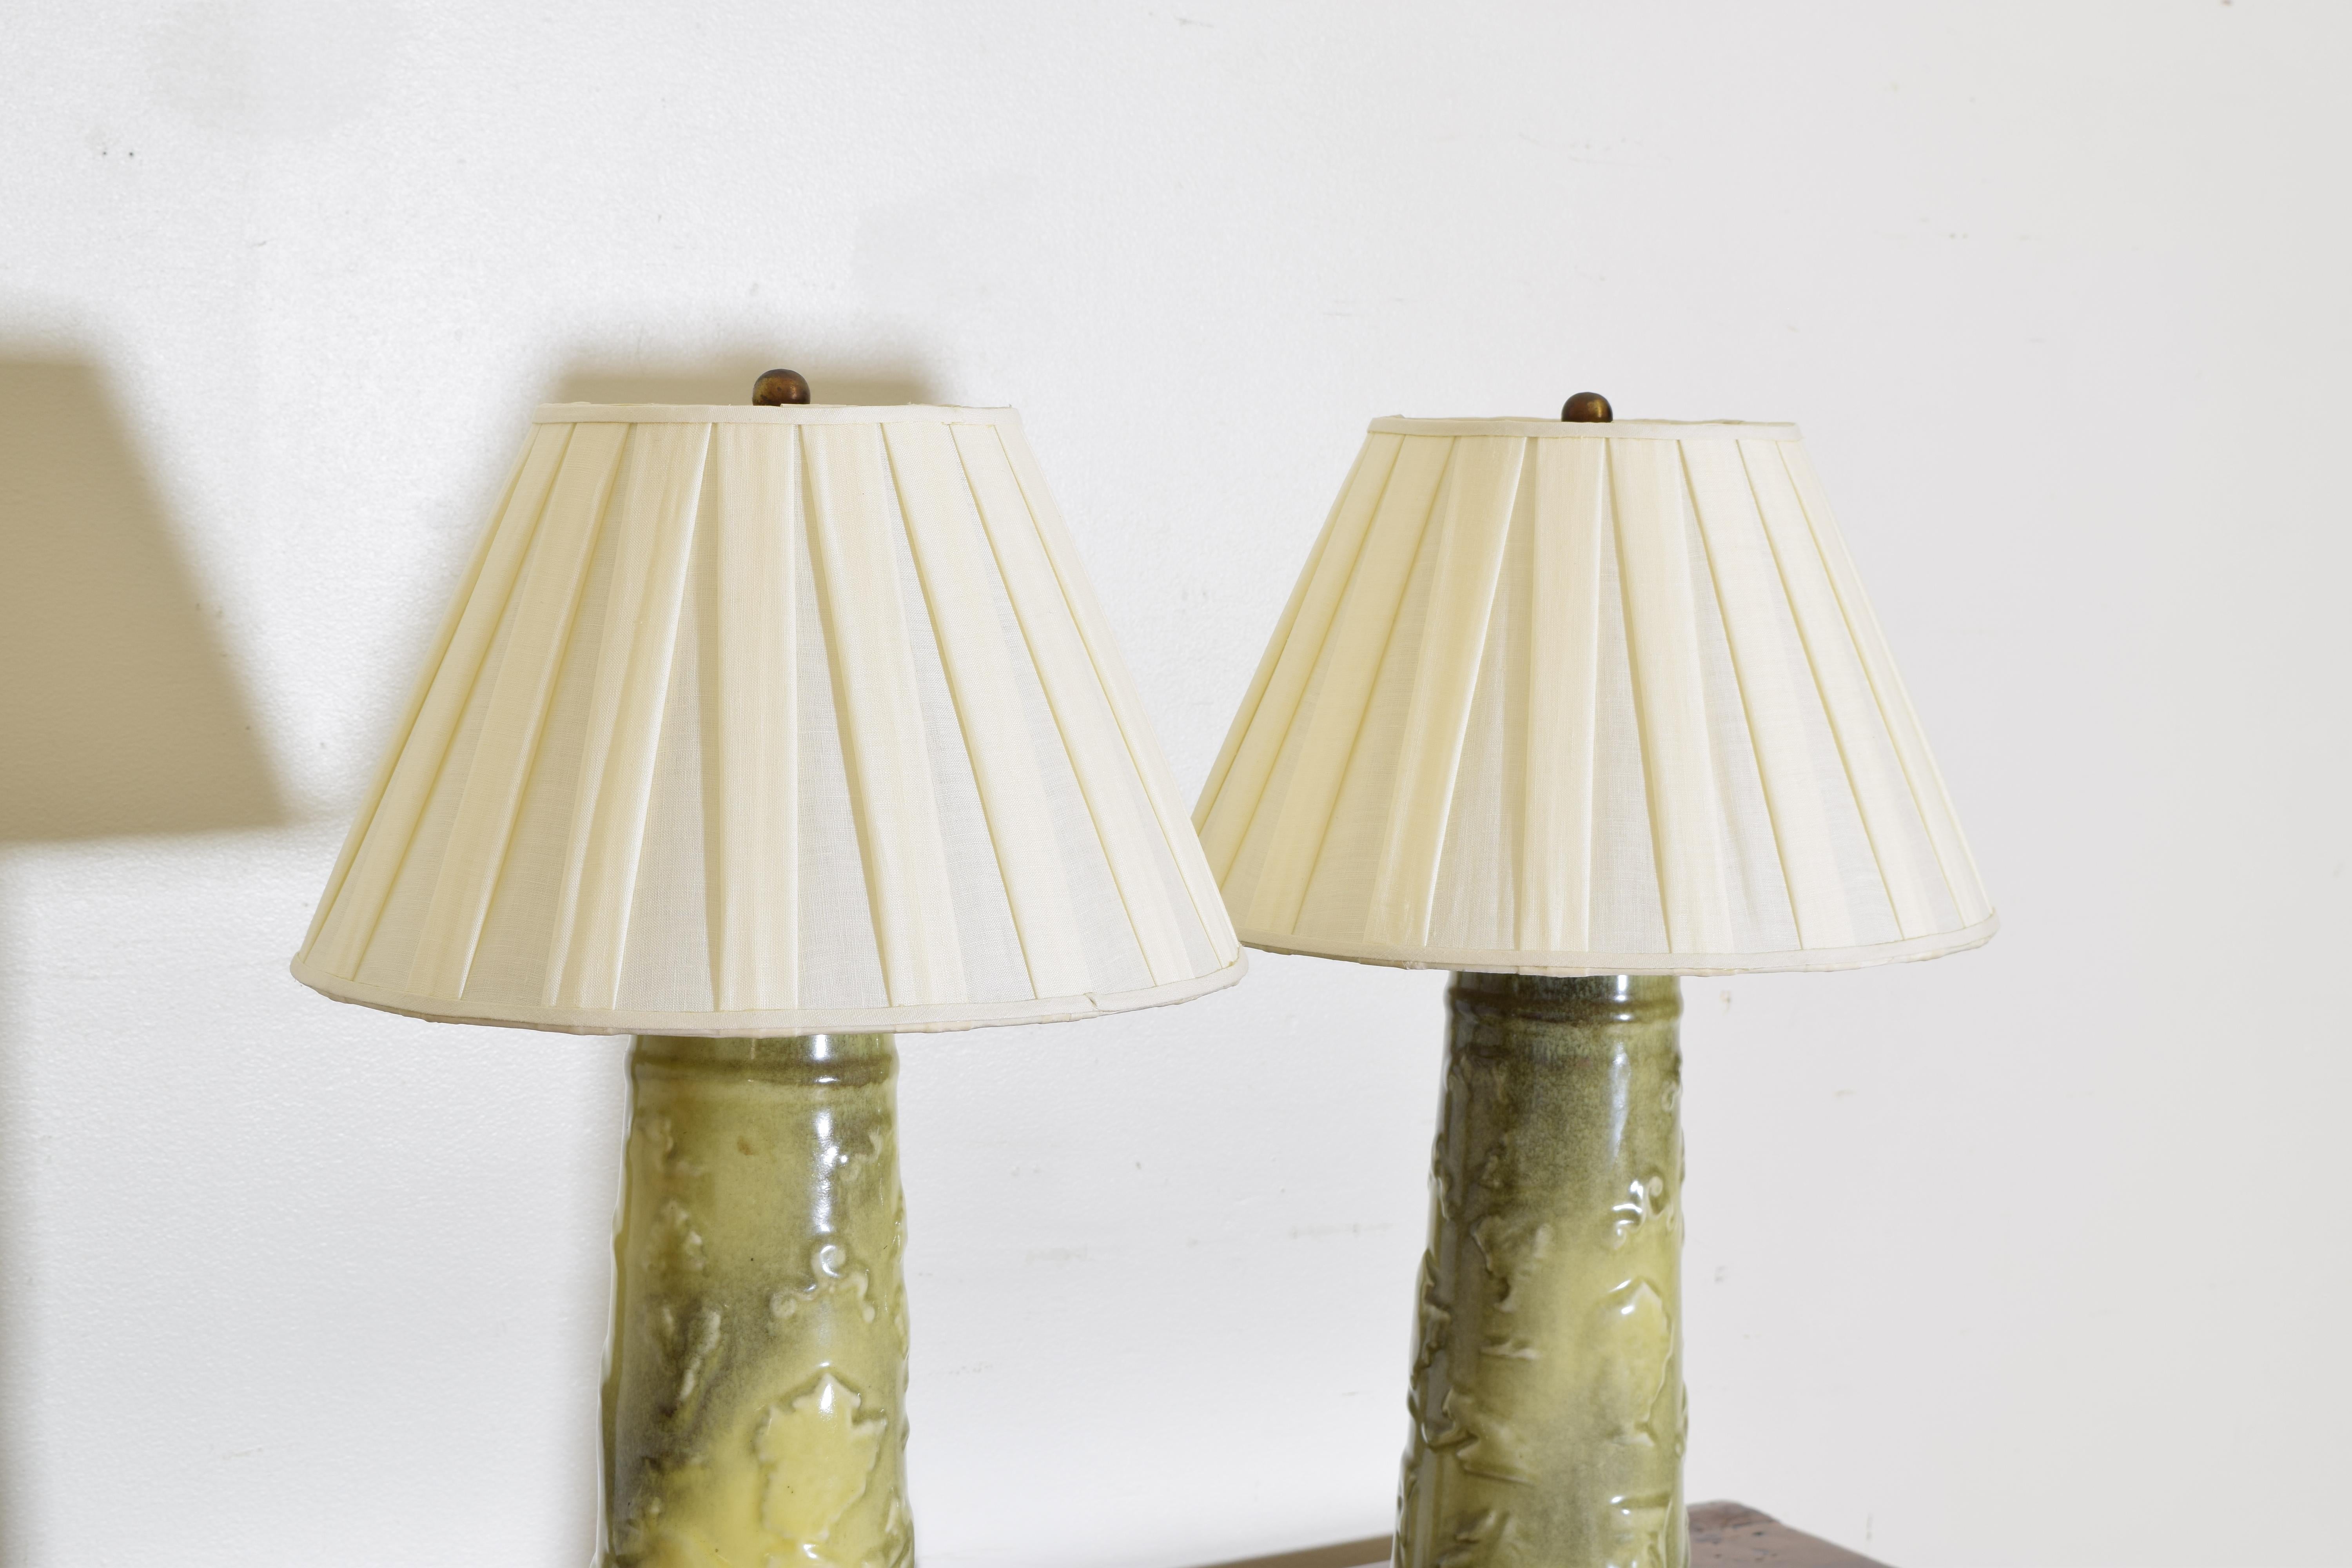 Unknown Pair of Ceramic Table Lamps in the Japanese Taste, mid 20th century For Sale